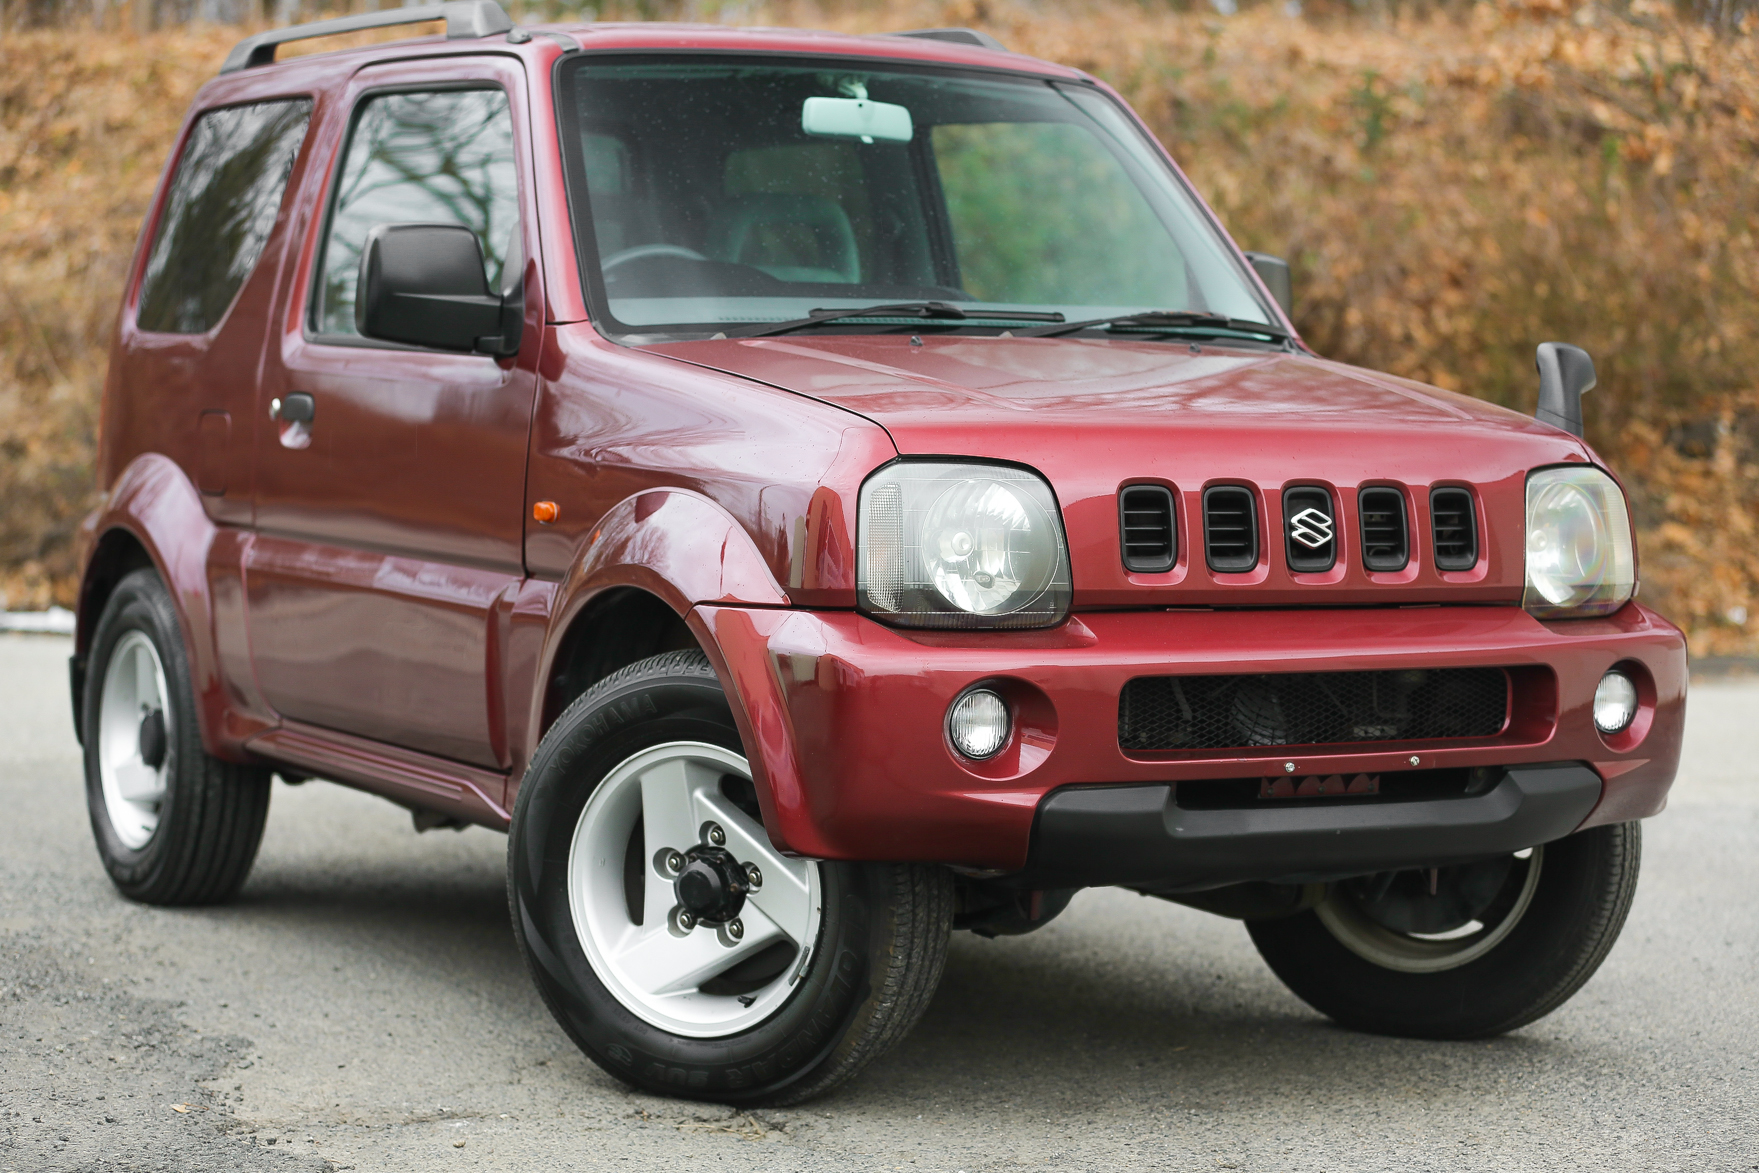 1998 Suzuki Jimny Wide - Available for $12,995